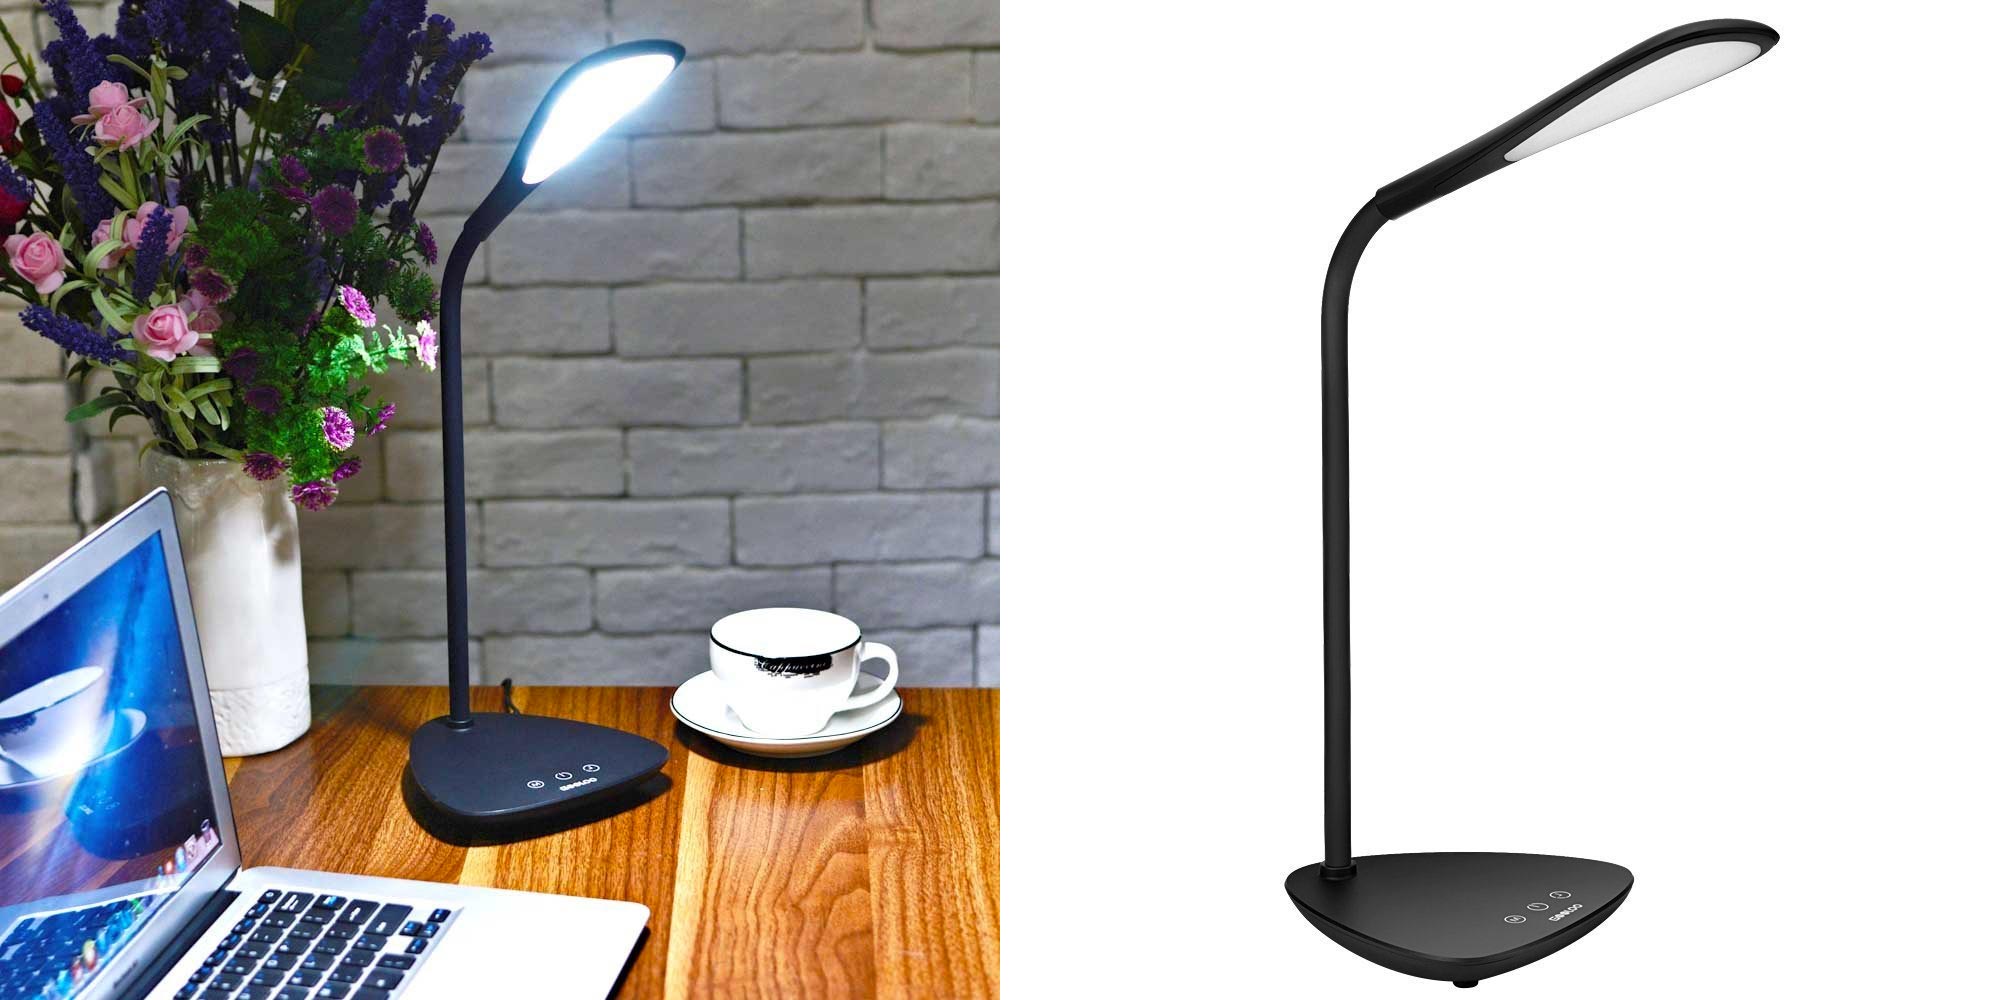 Gooloo 8w Dimmable Desk Lamp ?quality=82&strip=all